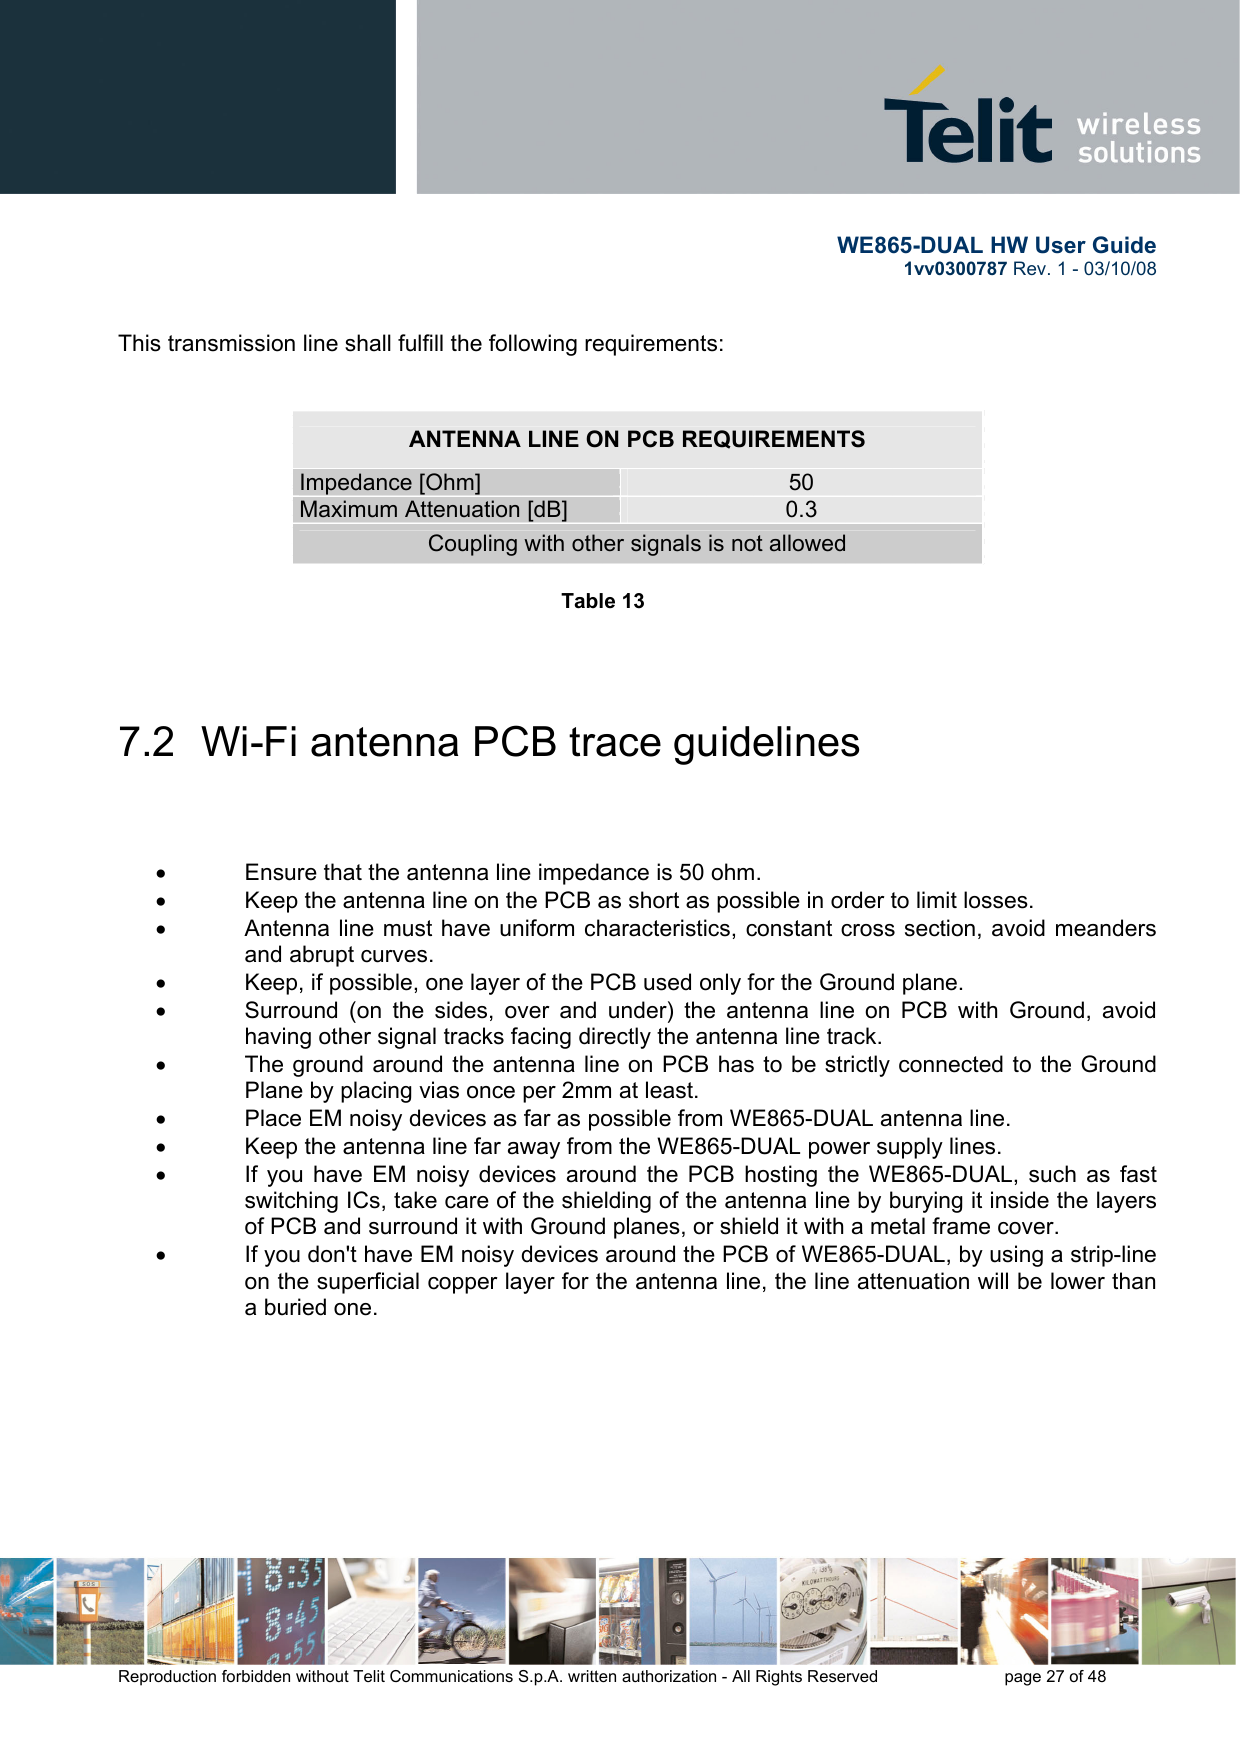       WE865-DUAL HW User Guide 1vv0300787 Rev. 1 - 03/10/08      Reproduction forbidden without Telit Communications S.p.A. written authorization - All Rights Reserved    page 27 of 48  This transmission line shall fulfill the following requirements:   ANTENNA LINE ON PCB REQUIREMENTS Impedance [Ohm]  50 Maximum Attenuation [dB]  0.3 Coupling with other signals is not allowed  Table 13        7.2  Wi-Fi antenna PCB trace guidelines    •  Ensure that the antenna line impedance is 50 ohm.  •  Keep the antenna line on the PCB as short as possible in order to limit losses. •  Antenna line must have uniform characteristics, constant cross section, avoid meanders and abrupt curves. •  Keep, if possible, one layer of the PCB used only for the Ground plane. •  Surround (on the sides, over and under) the antenna line on PCB with Ground, avoid having other signal tracks facing directly the antenna line track. •  The ground around the antenna line on PCB has to be strictly connected to the Ground Plane by placing vias once per 2mm at least. •  Place EM noisy devices as far as possible from WE865-DUAL antenna line.  •  Keep the antenna line far away from the WE865-DUAL power supply lines. •  If you have EM noisy devices around the PCB hosting the WE865-DUAL, such as fast switching ICs, take care of the shielding of the antenna line by burying it inside the layers of PCB and surround it with Ground planes, or shield it with a metal frame cover. •  If you don&apos;t have EM noisy devices around the PCB of WE865-DUAL, by using a strip-line on the superficial copper layer for the antenna line, the line attenuation will be lower than a buried one.        